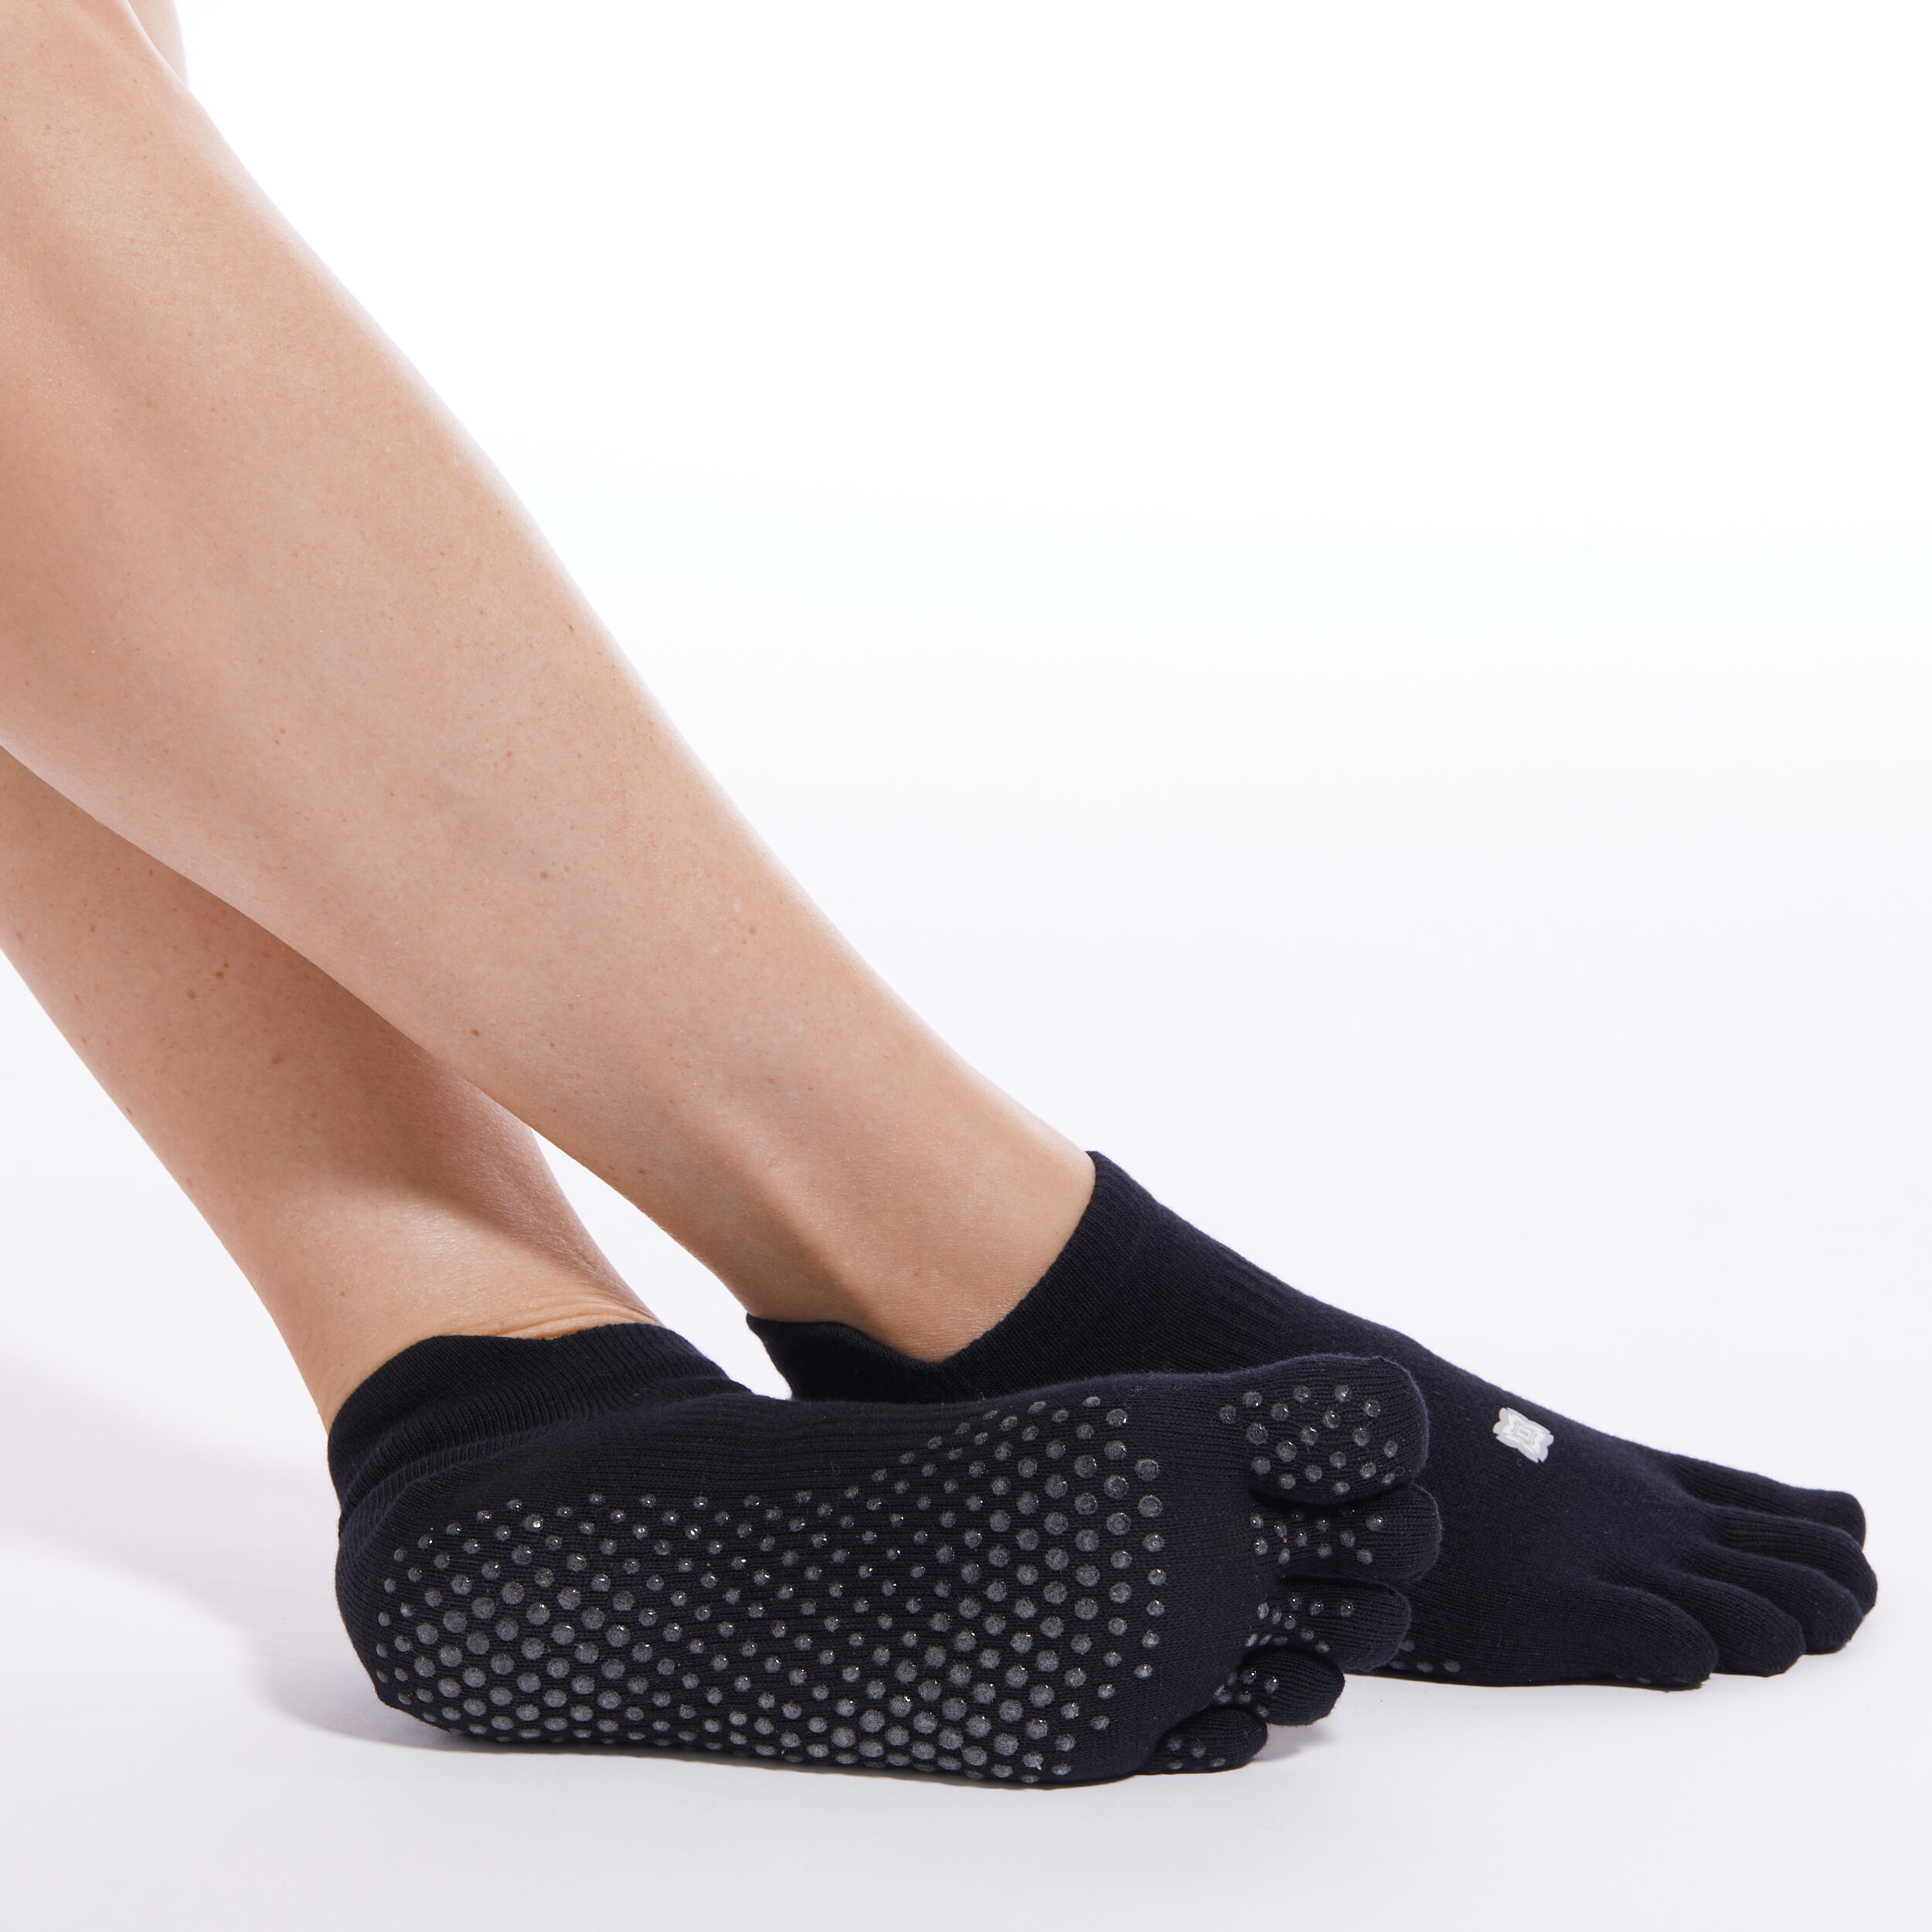 Women's Open Front Pilates & Yoga Socks with Silicon Grip Soles - Pink -  £5.99